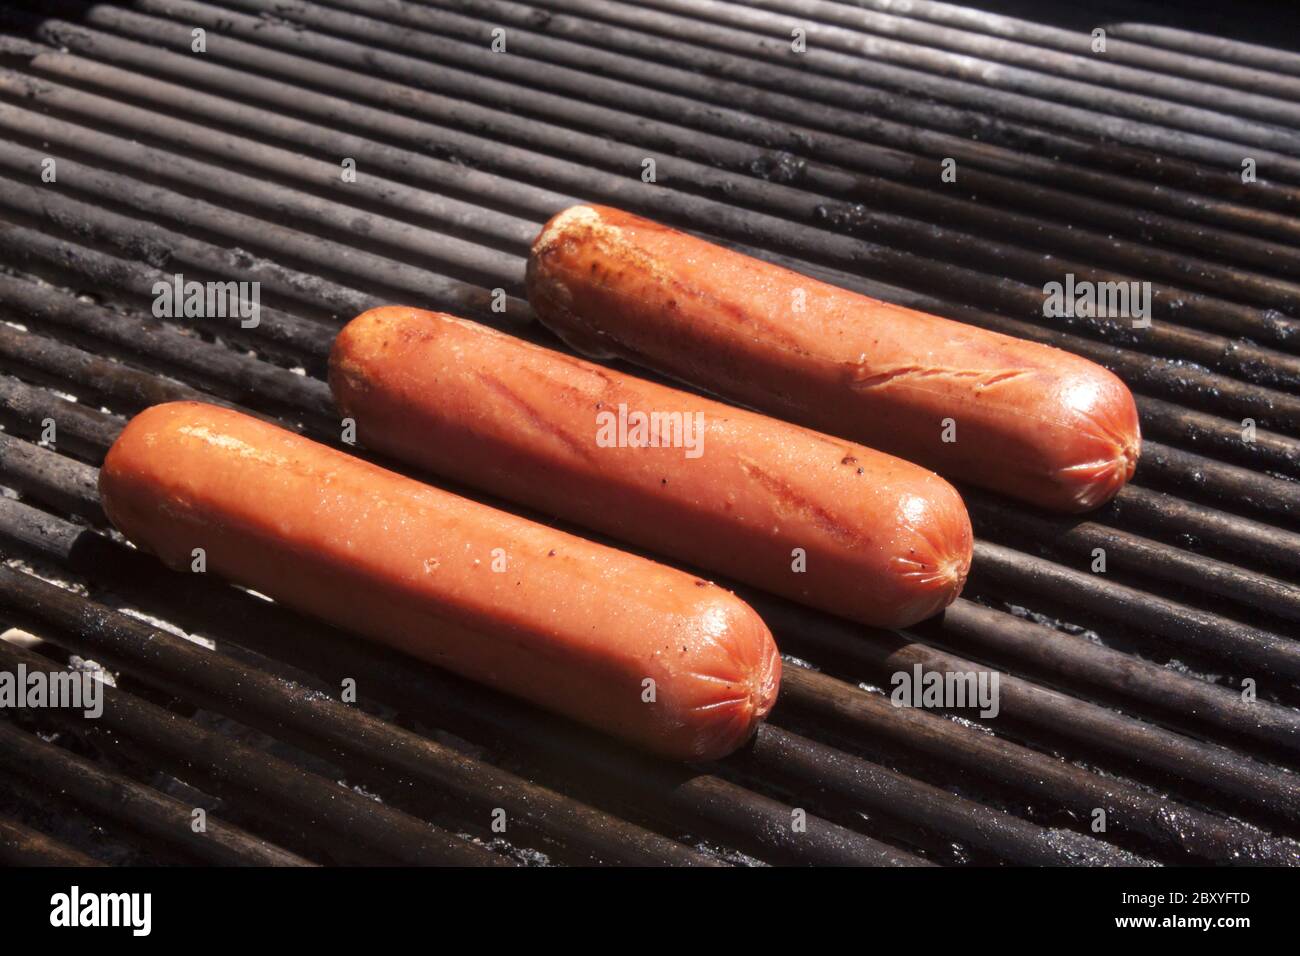 Hot dogs on a bbq Stock Photo